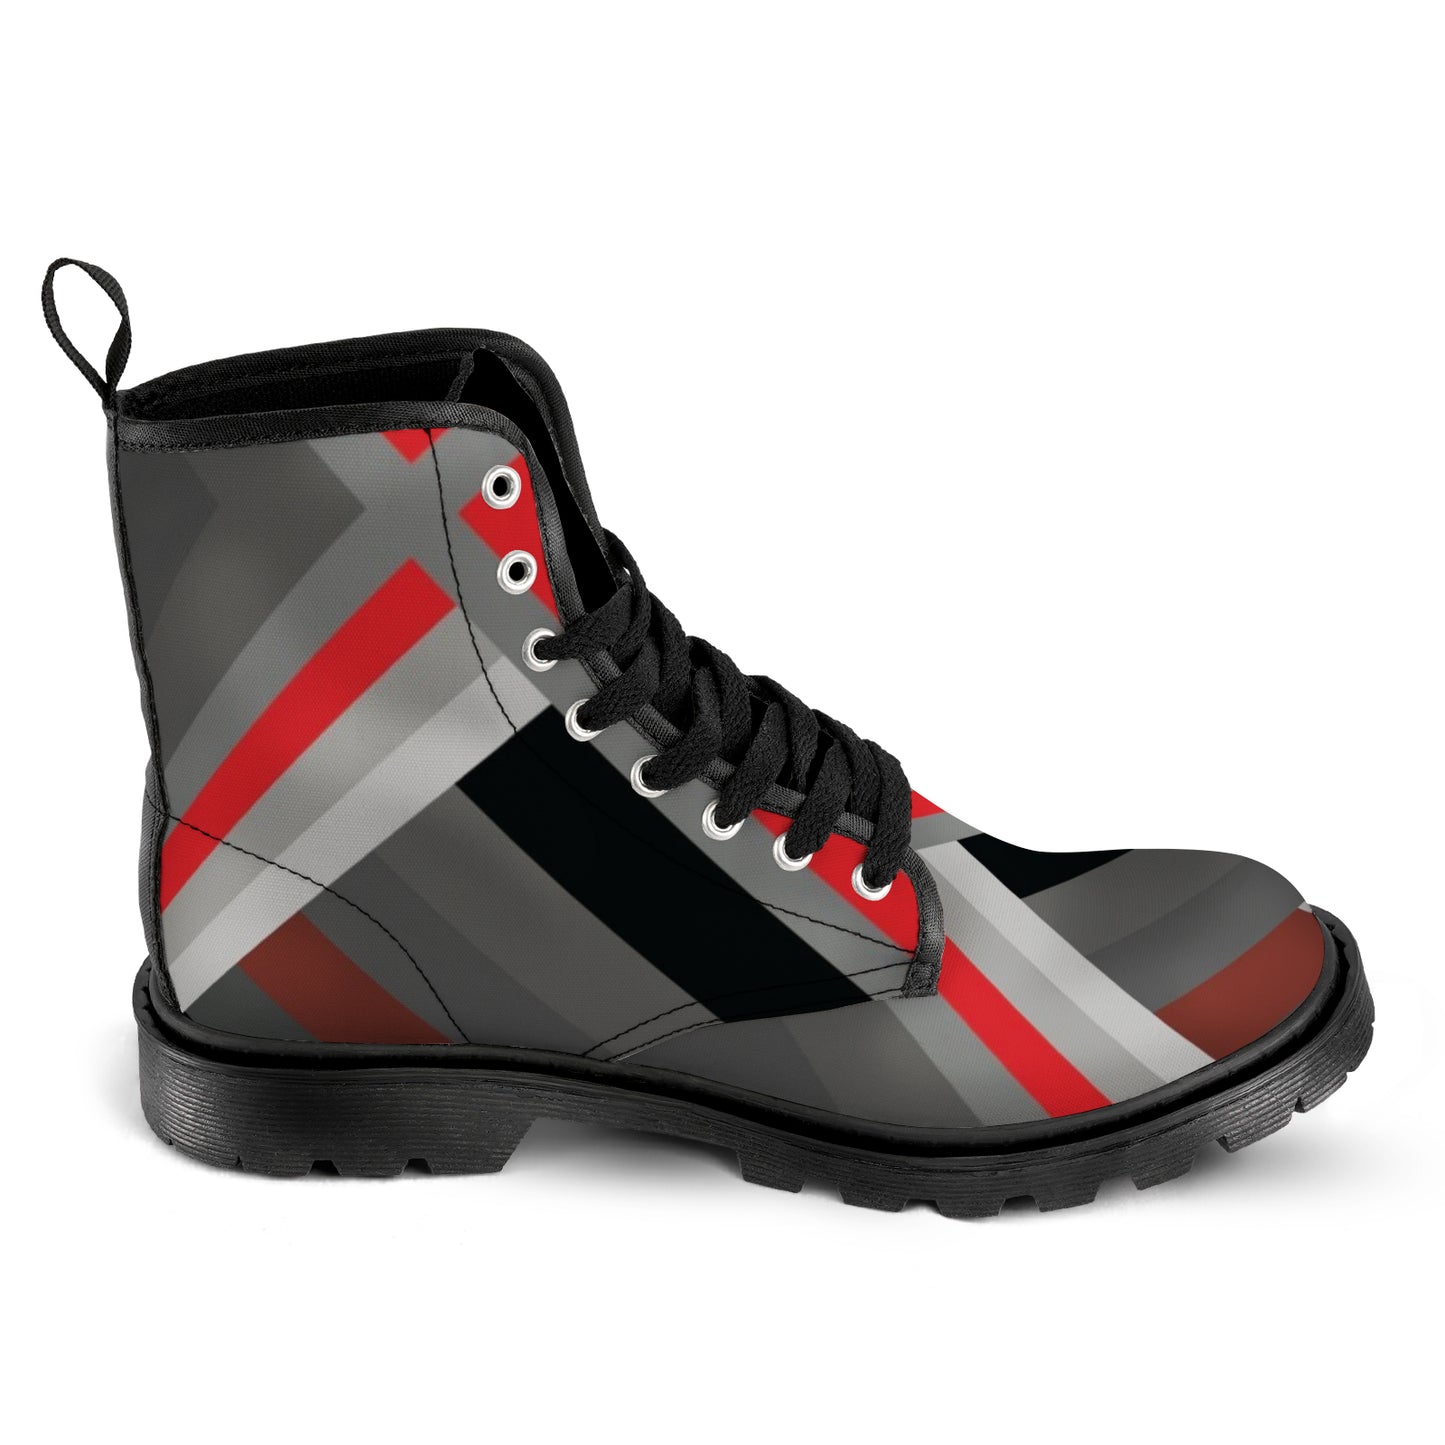 Men's Lace Up Canvas Boots - Black/Red/Grey